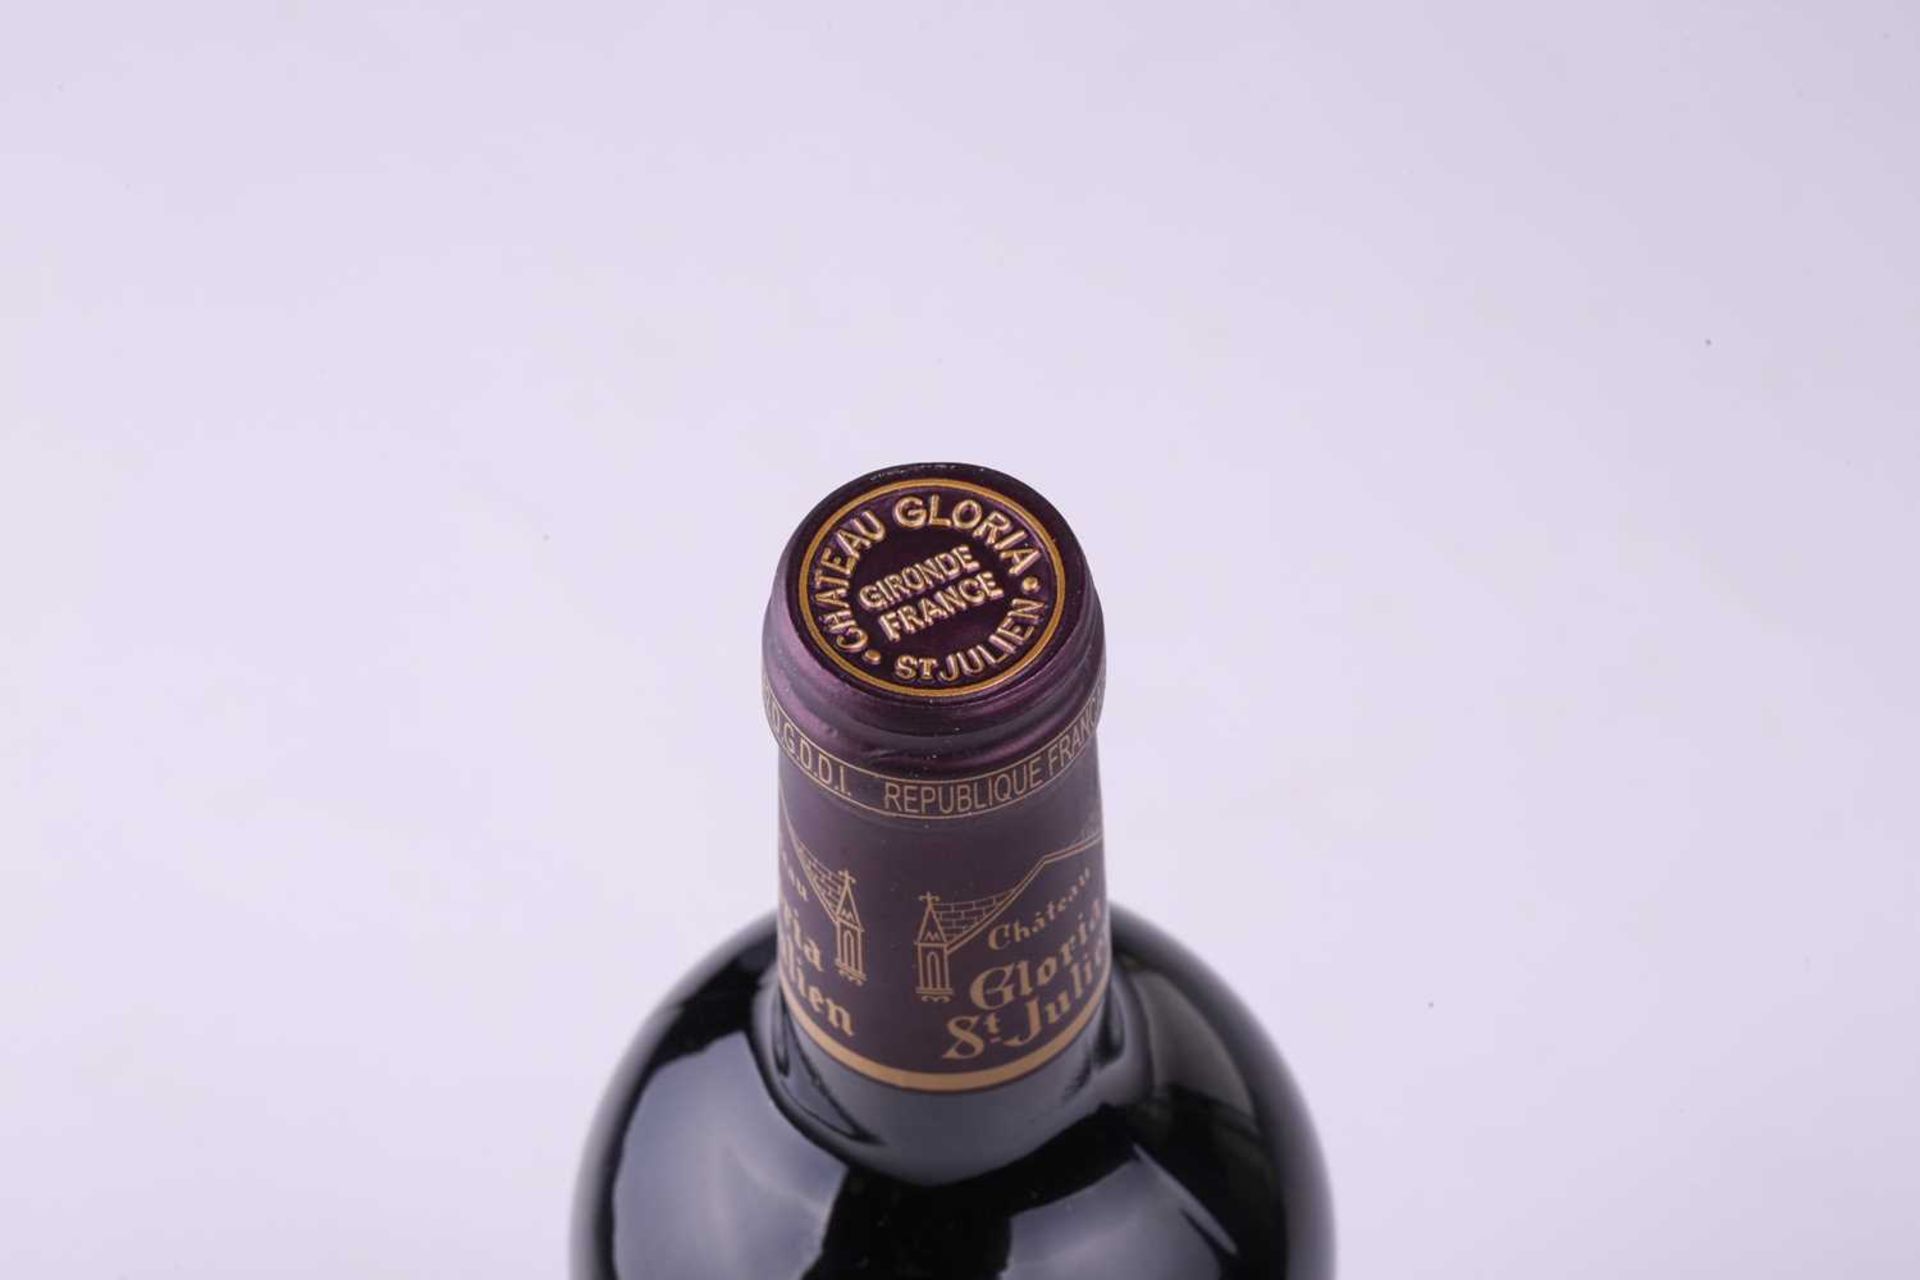 Six bottles of Chateau Gloria St Julien Bordeaux, 2011, OWCPrivate collector in London Unopened - Image 16 of 21